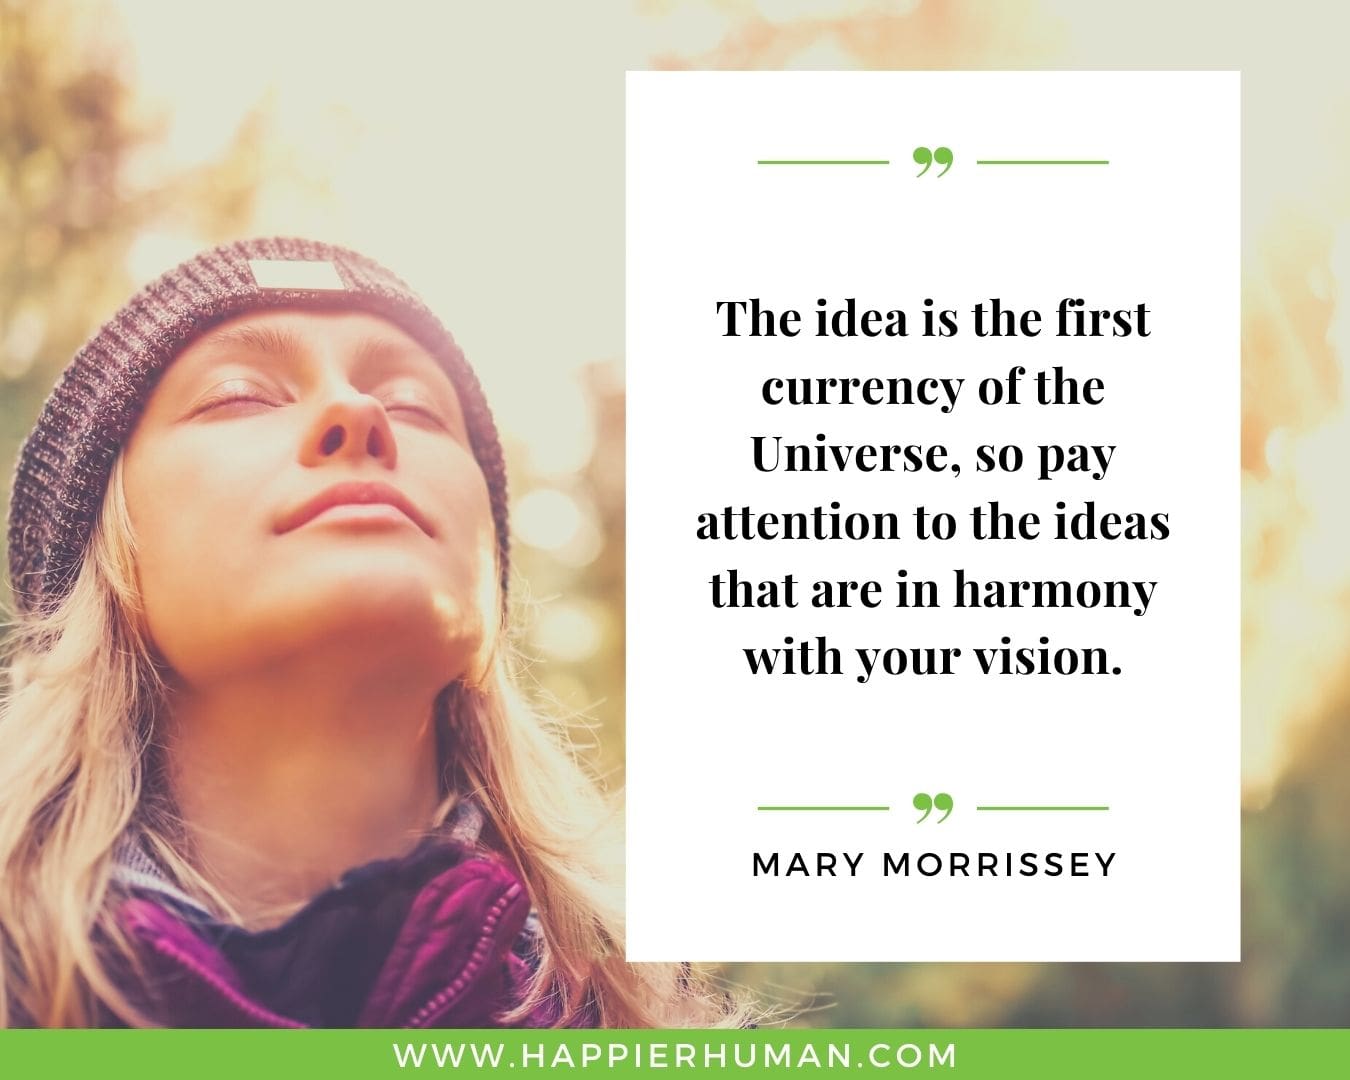 Positive Energy Quotes - “The idea is the first currency of the Universe, so pay attention to the ideas that are in harmony with your vision.” - Mary Morrissey